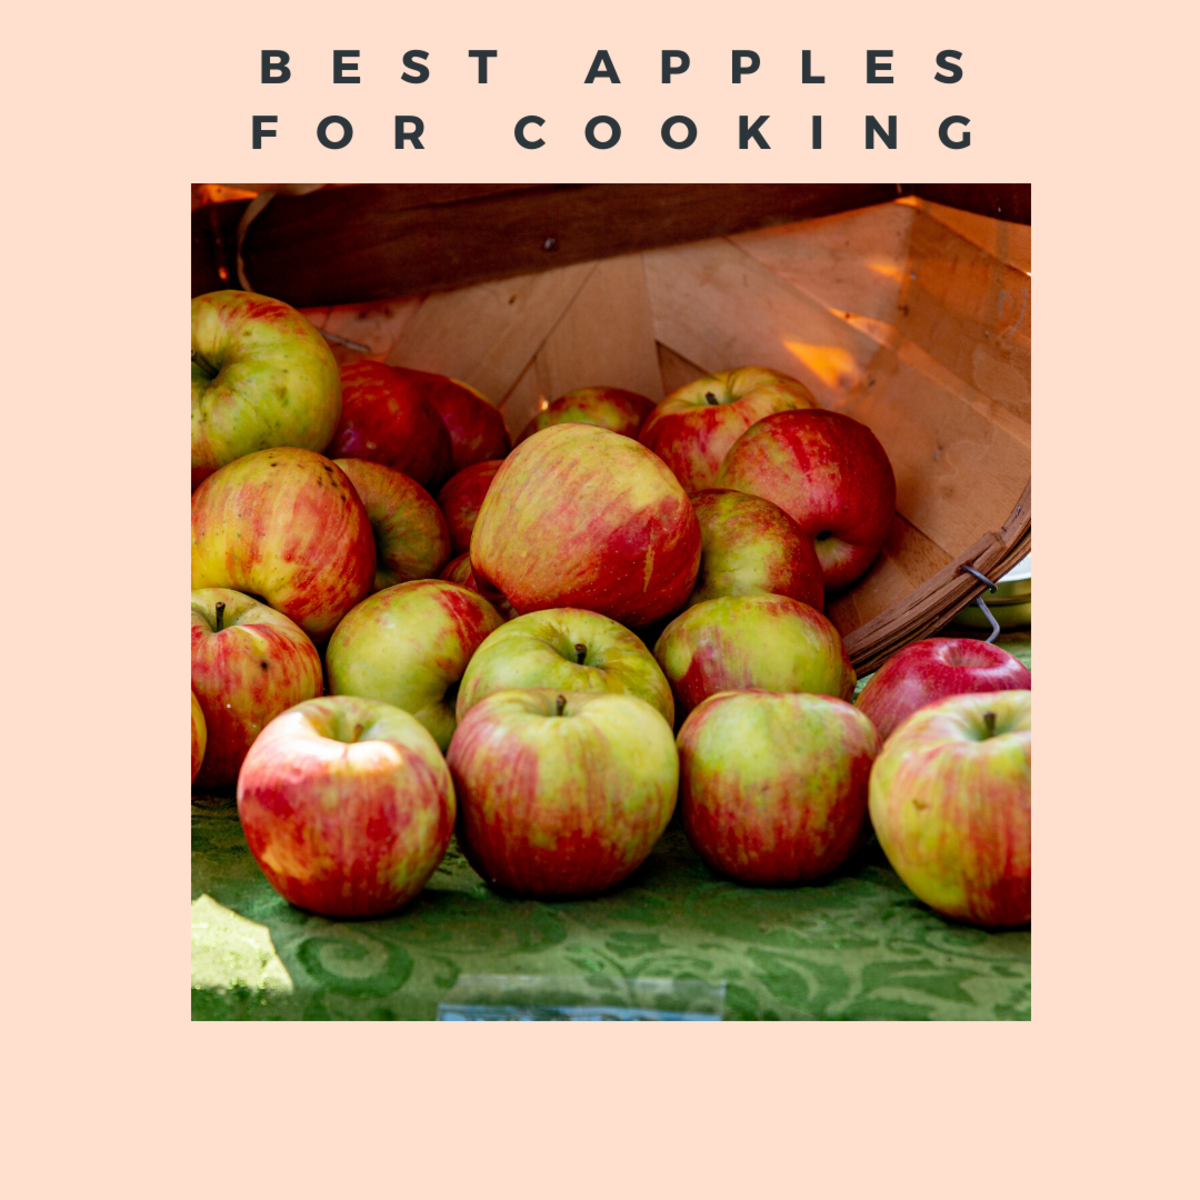 Which Are the Best Apples for Cooking?